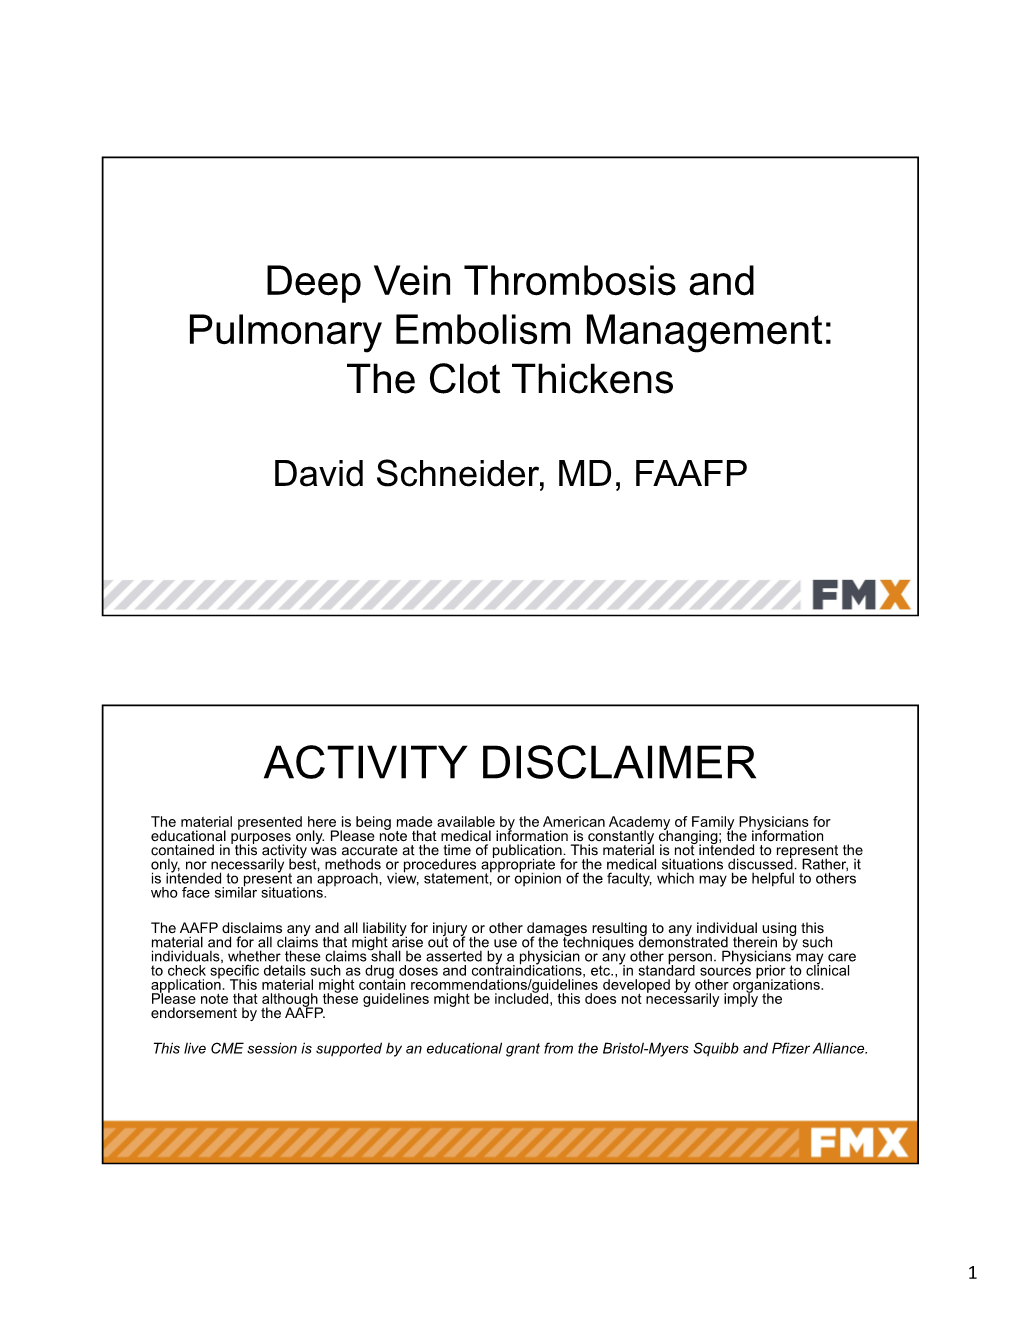 Deep Vein Thrombosis and Pulmonary Embolism Management: the Clot Thickens